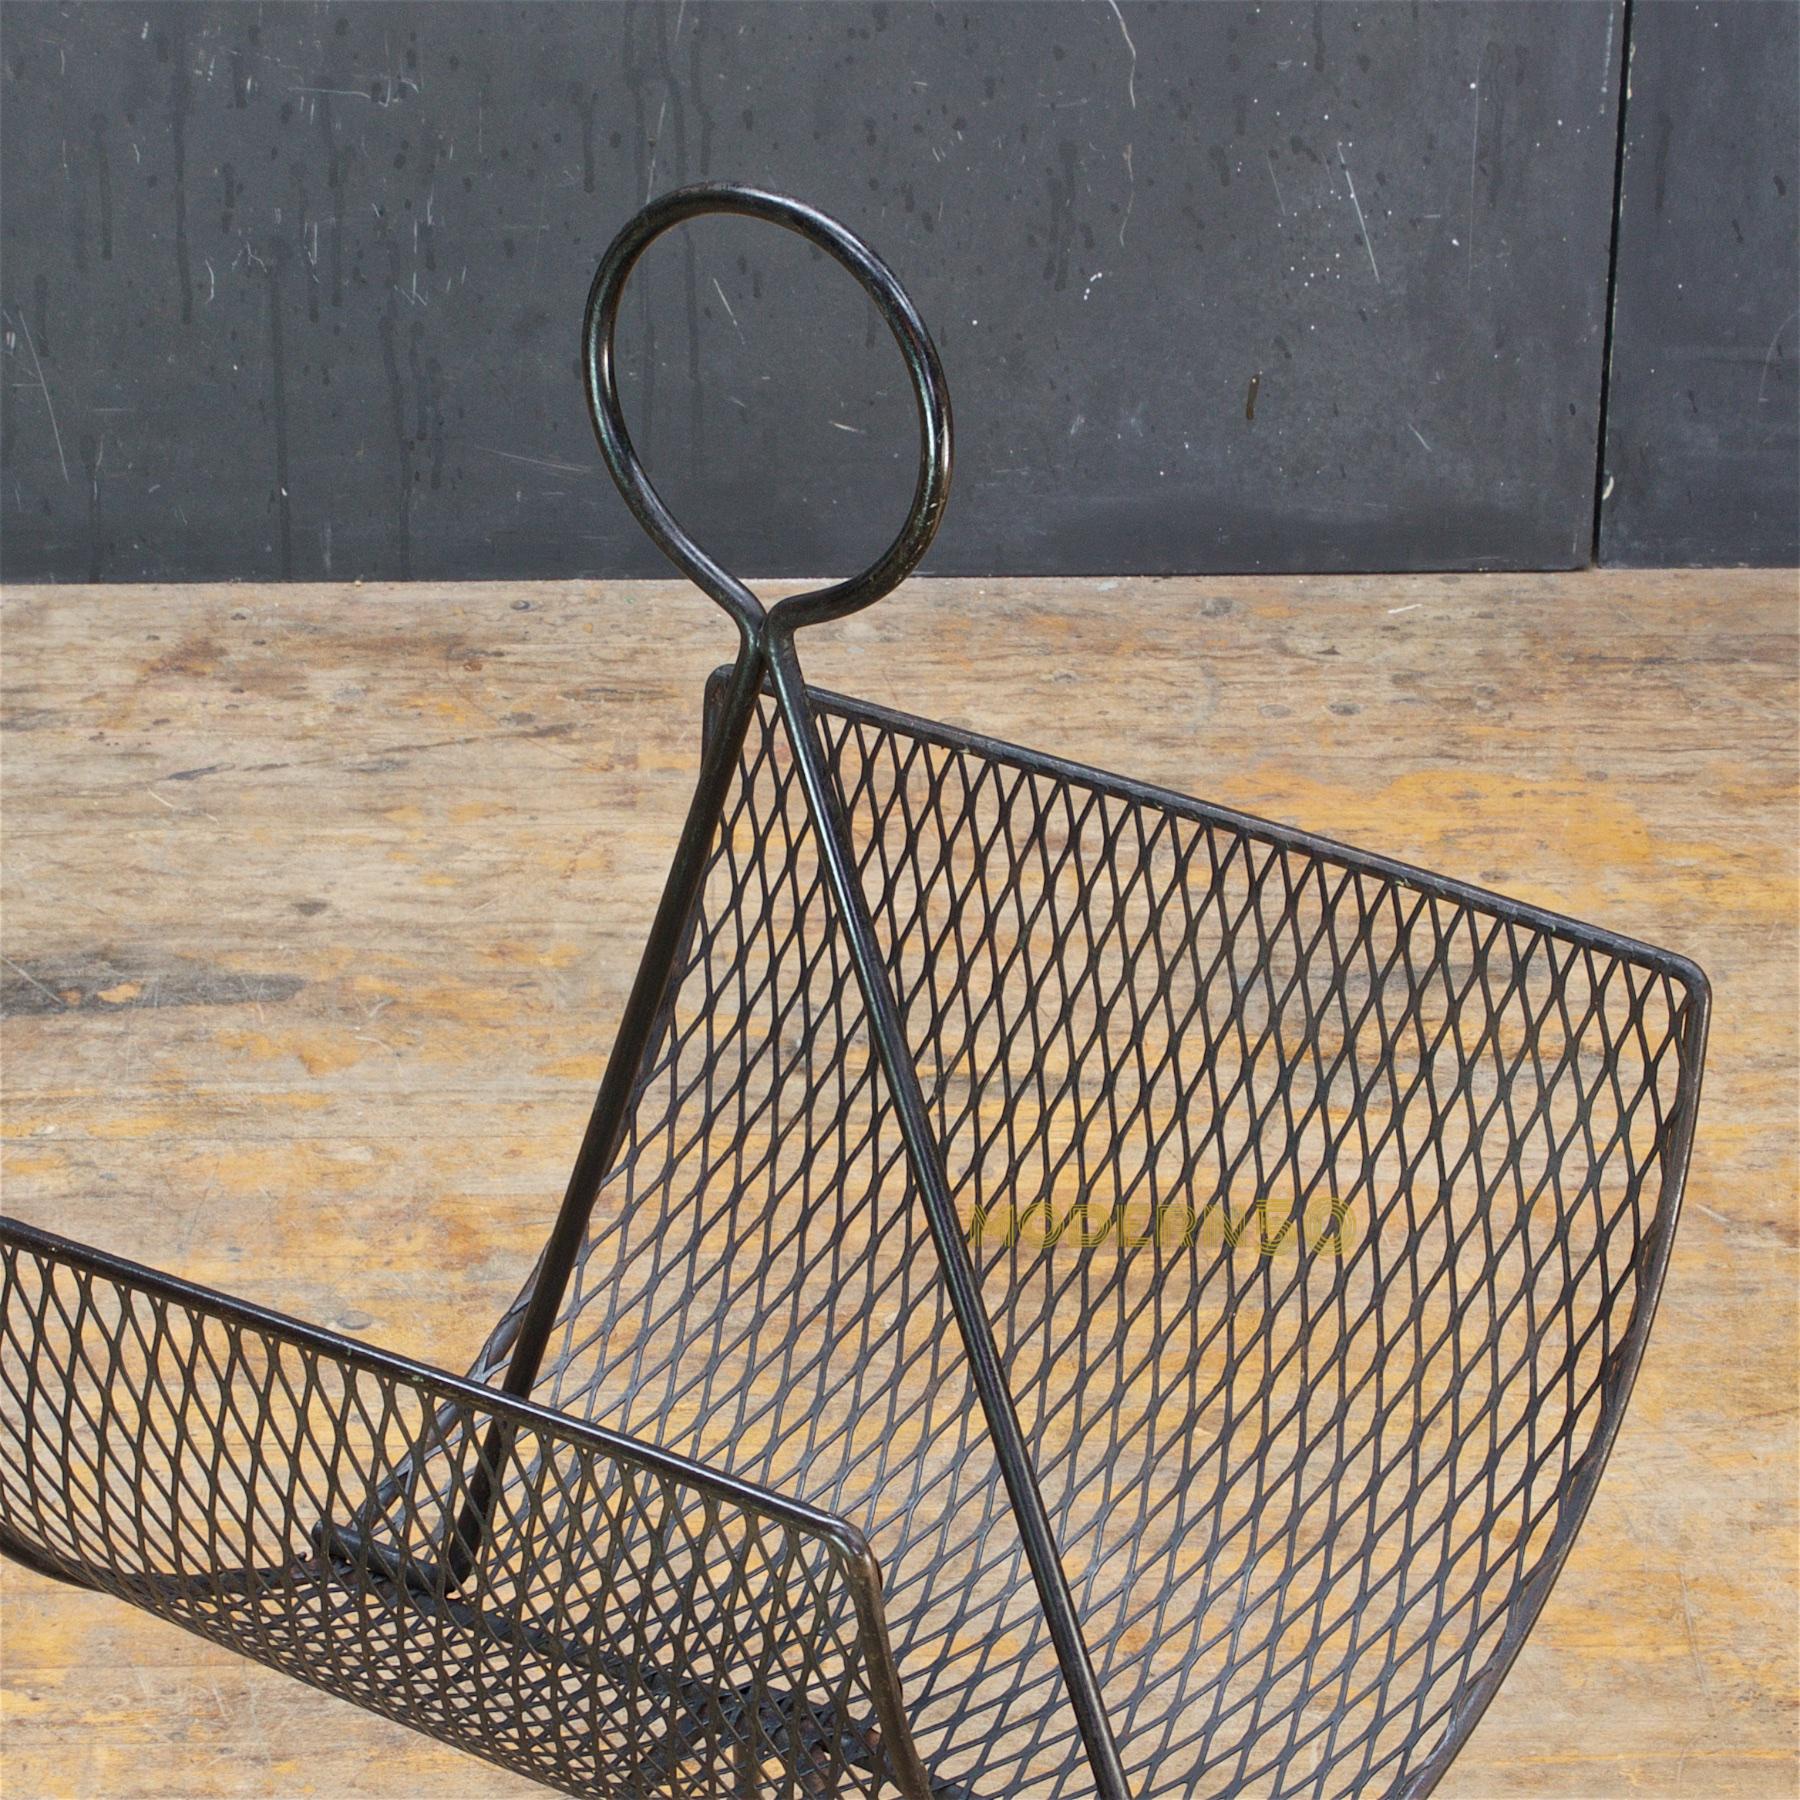 Welded 1950s Seymour Robins Architectural Catch-All Rack Bin California Design For Sale